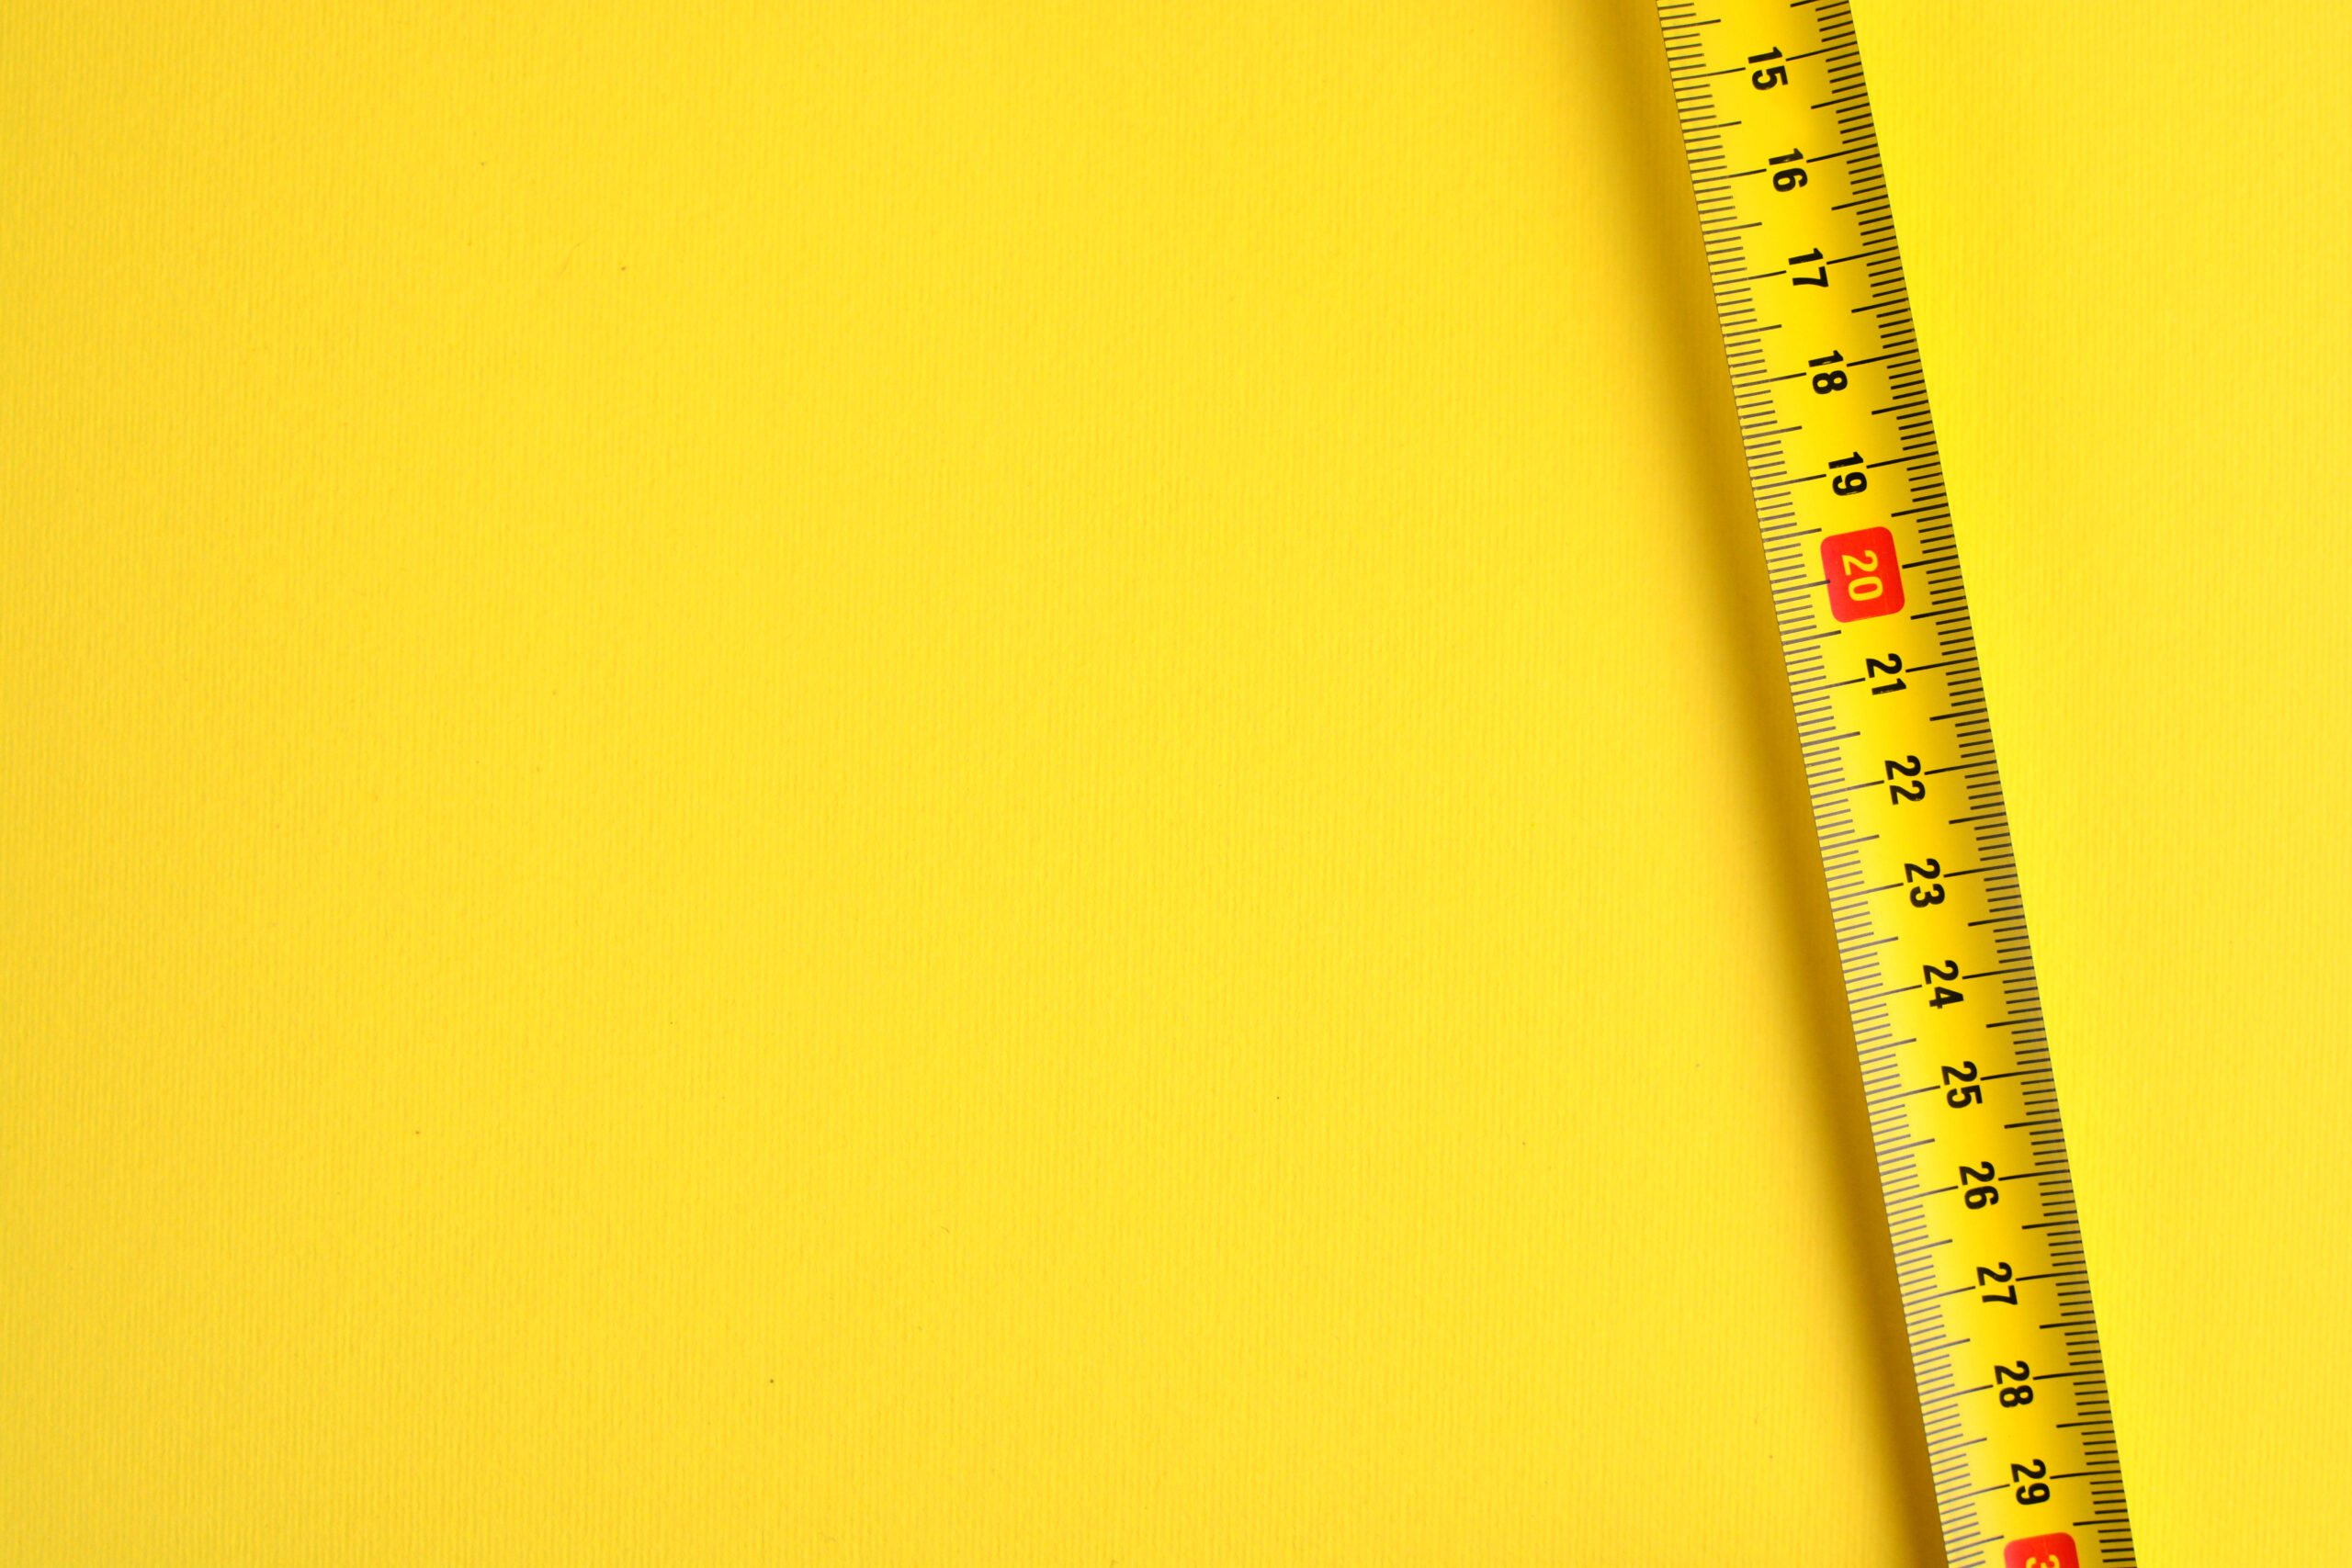 Tape measure scale on a yellow background. 